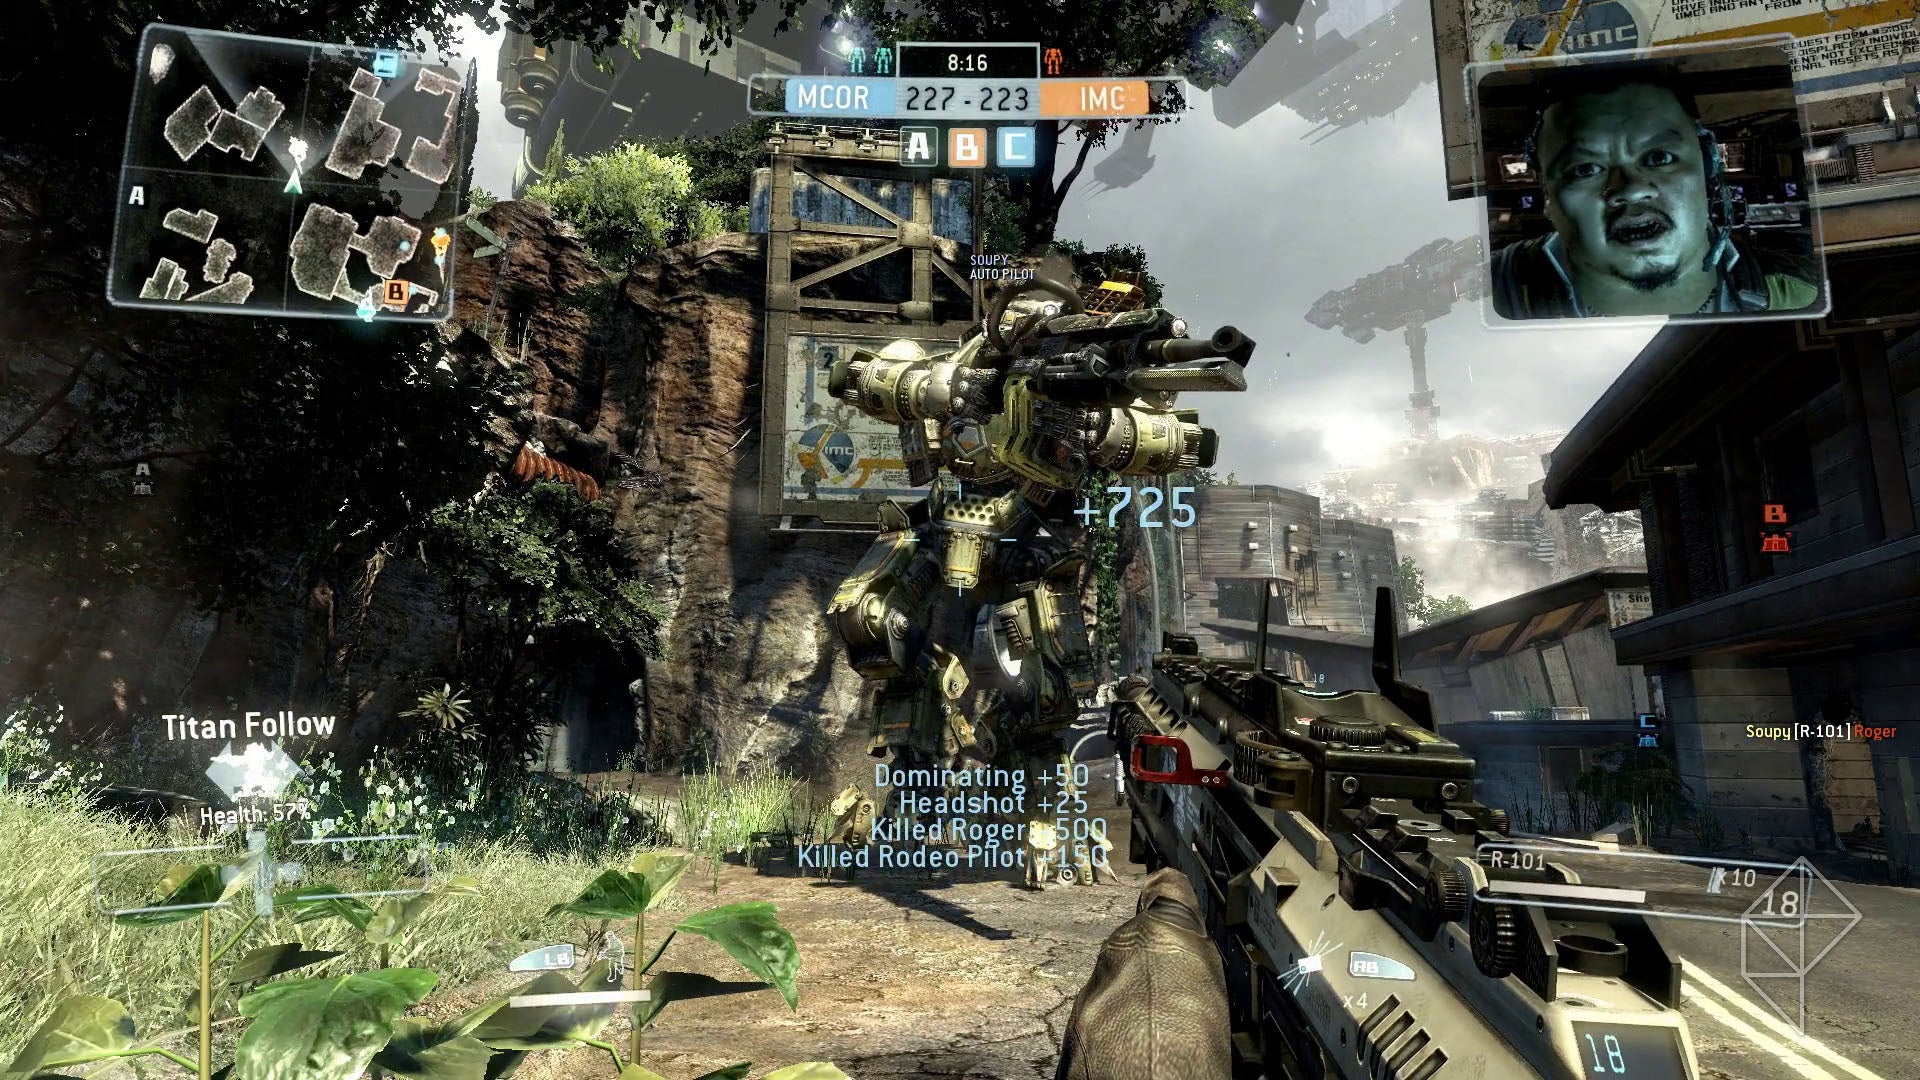  Titanfall - Xbox One : Electronic Arts: Video Games